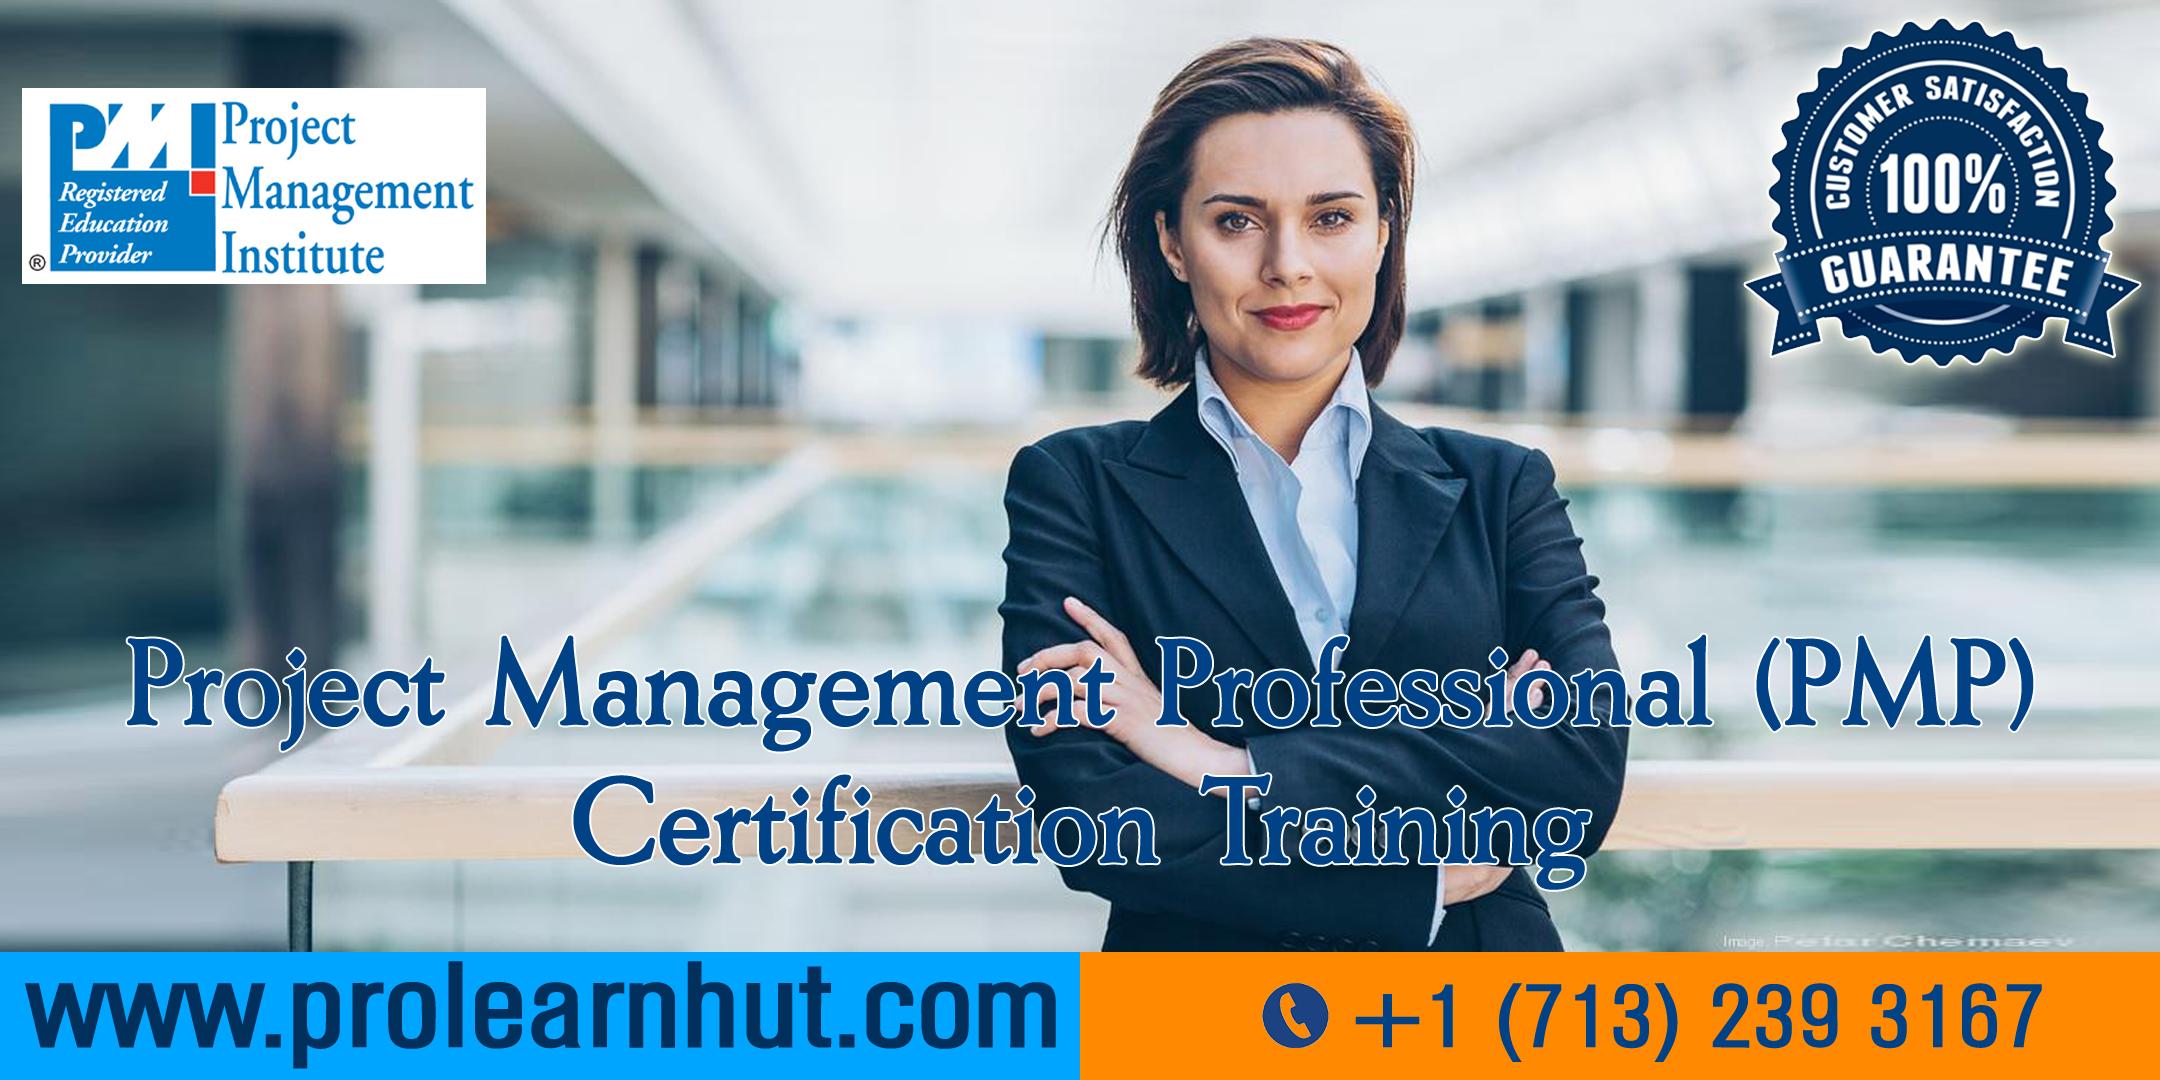 PMP Certification | Project Management Certification| PMP Training in Roseville, CA | ProLearnHut